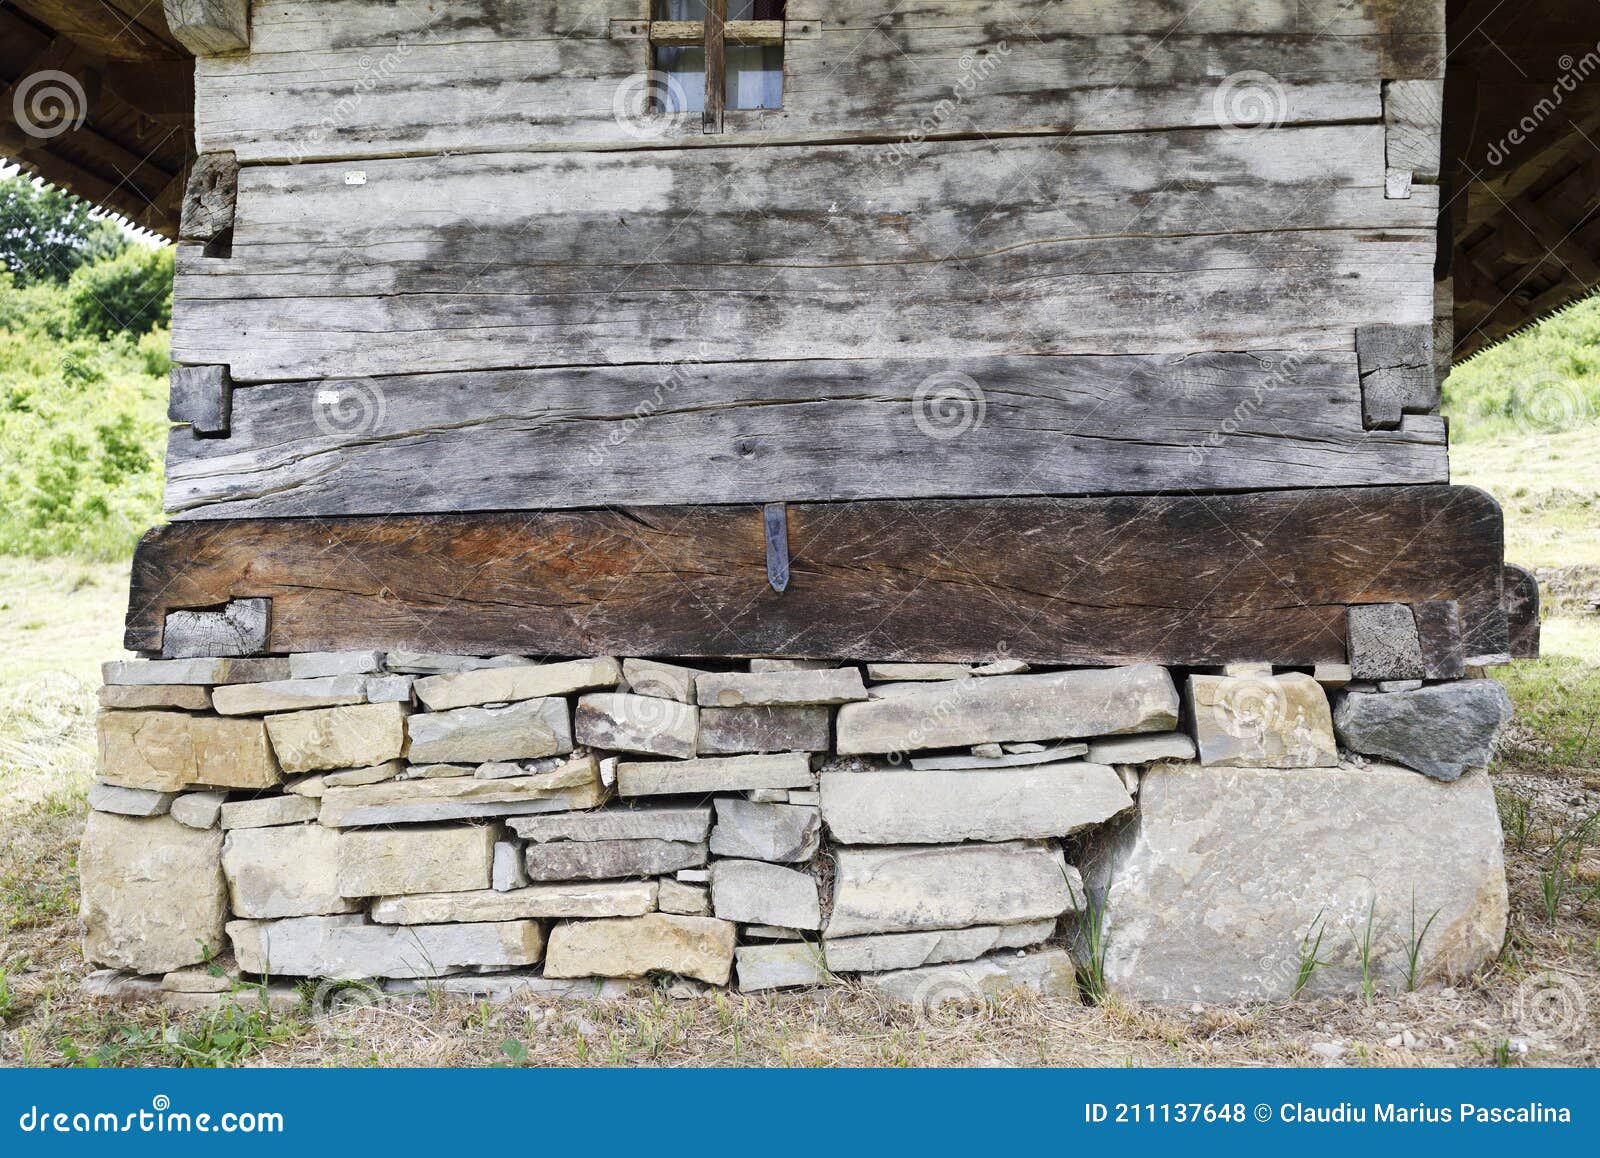 Old Church with Stone Foundation Stock Photo - Image of maramures ...